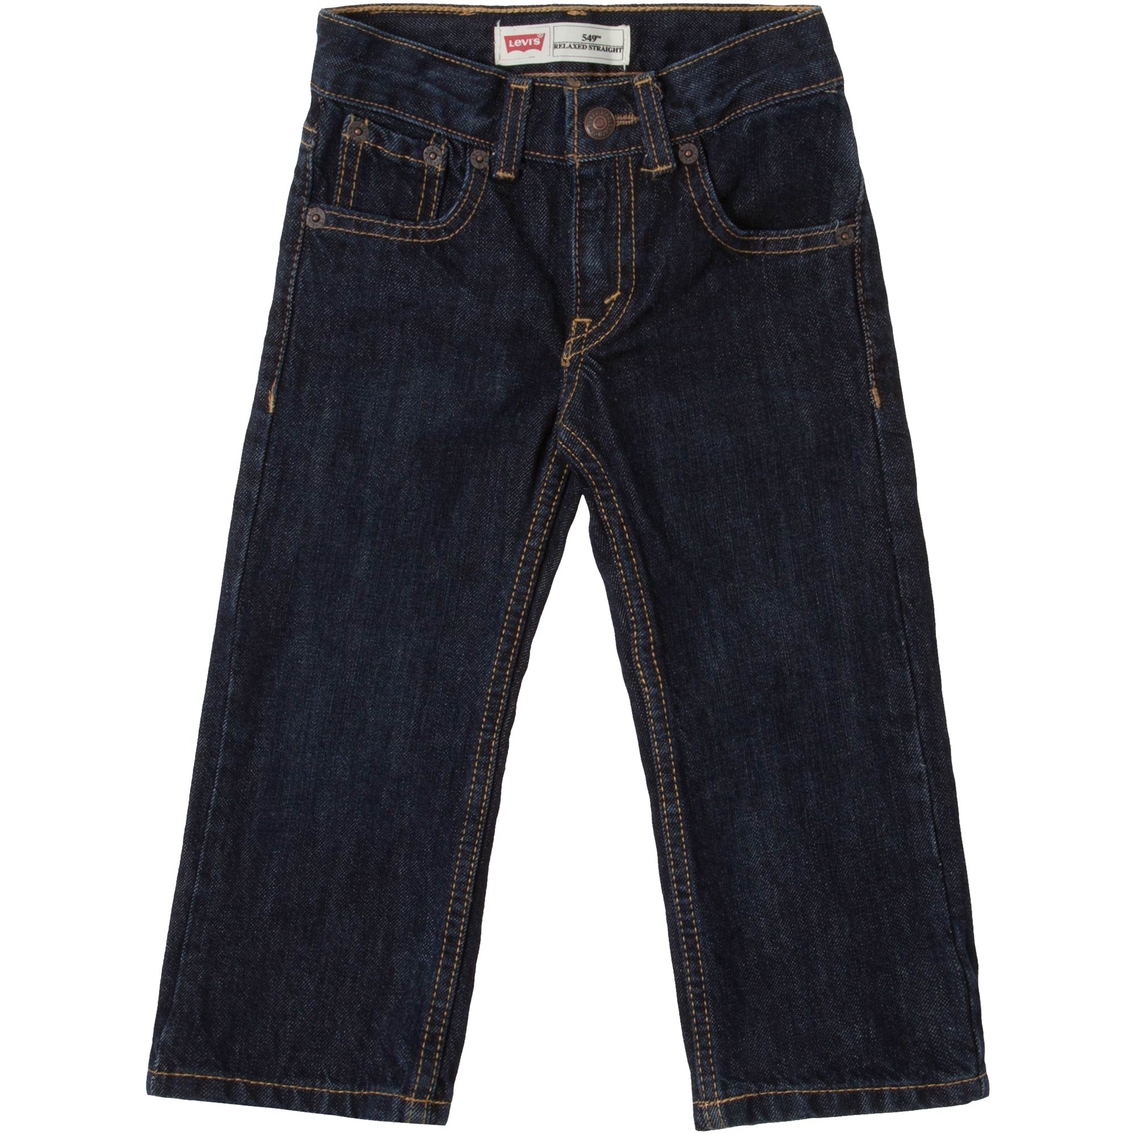 Levi's 549 Toddler Boys Relaxed Straight Jeans | Toddler Boys 2t-4t ...